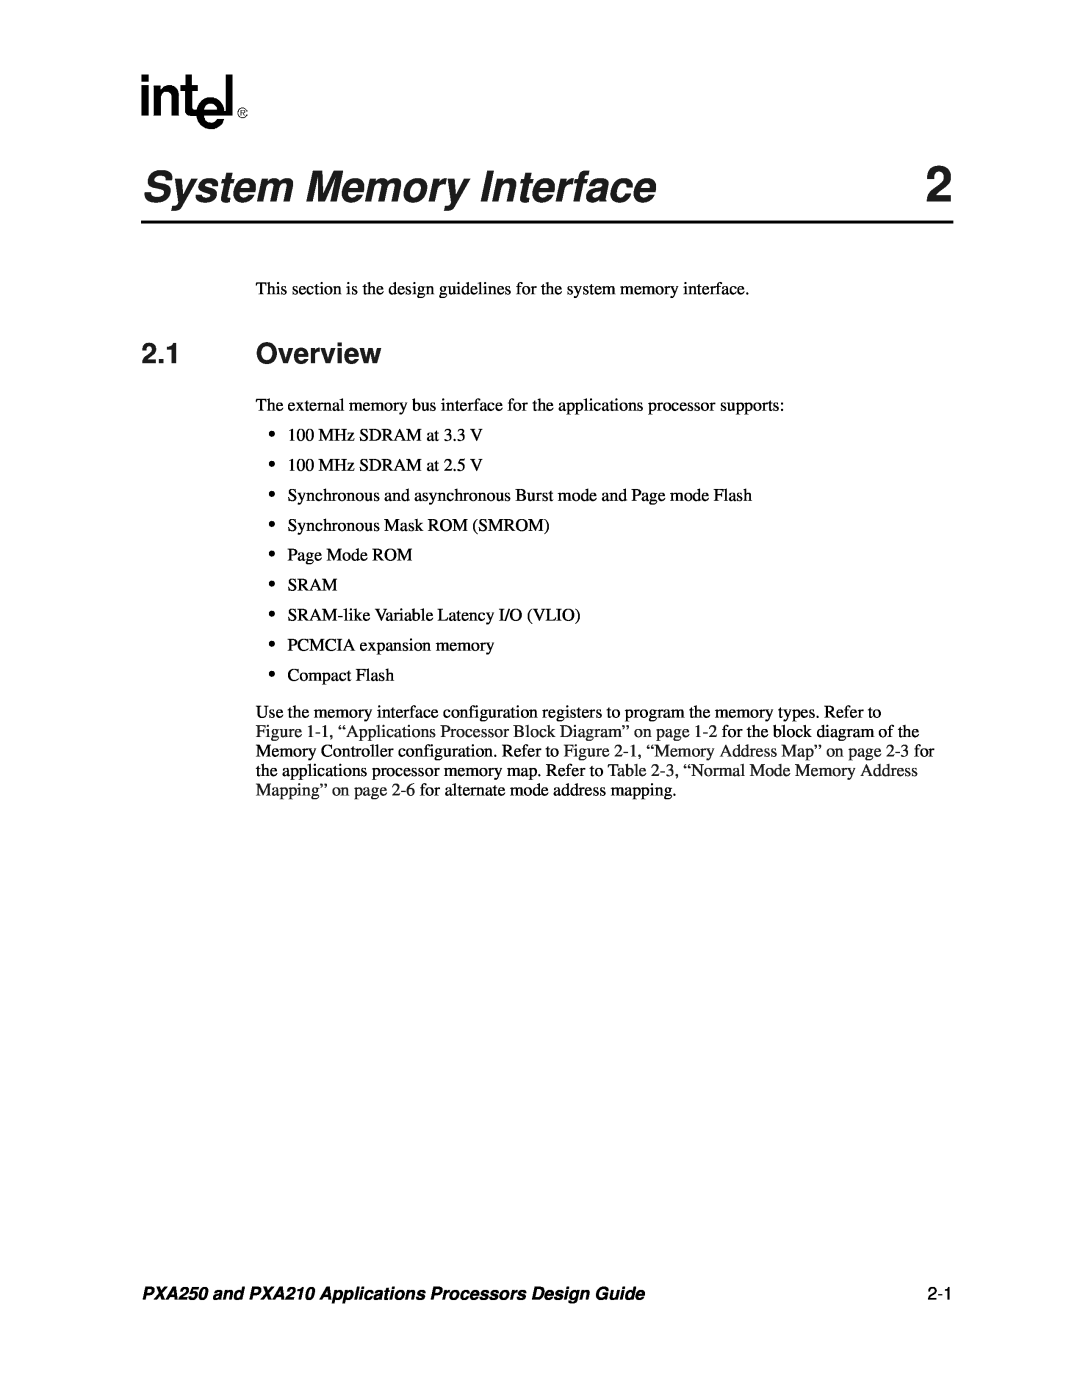 Intel manual System Memory Interface, Overview, PXA250 and PXA210 Applications Processors Design Guide 